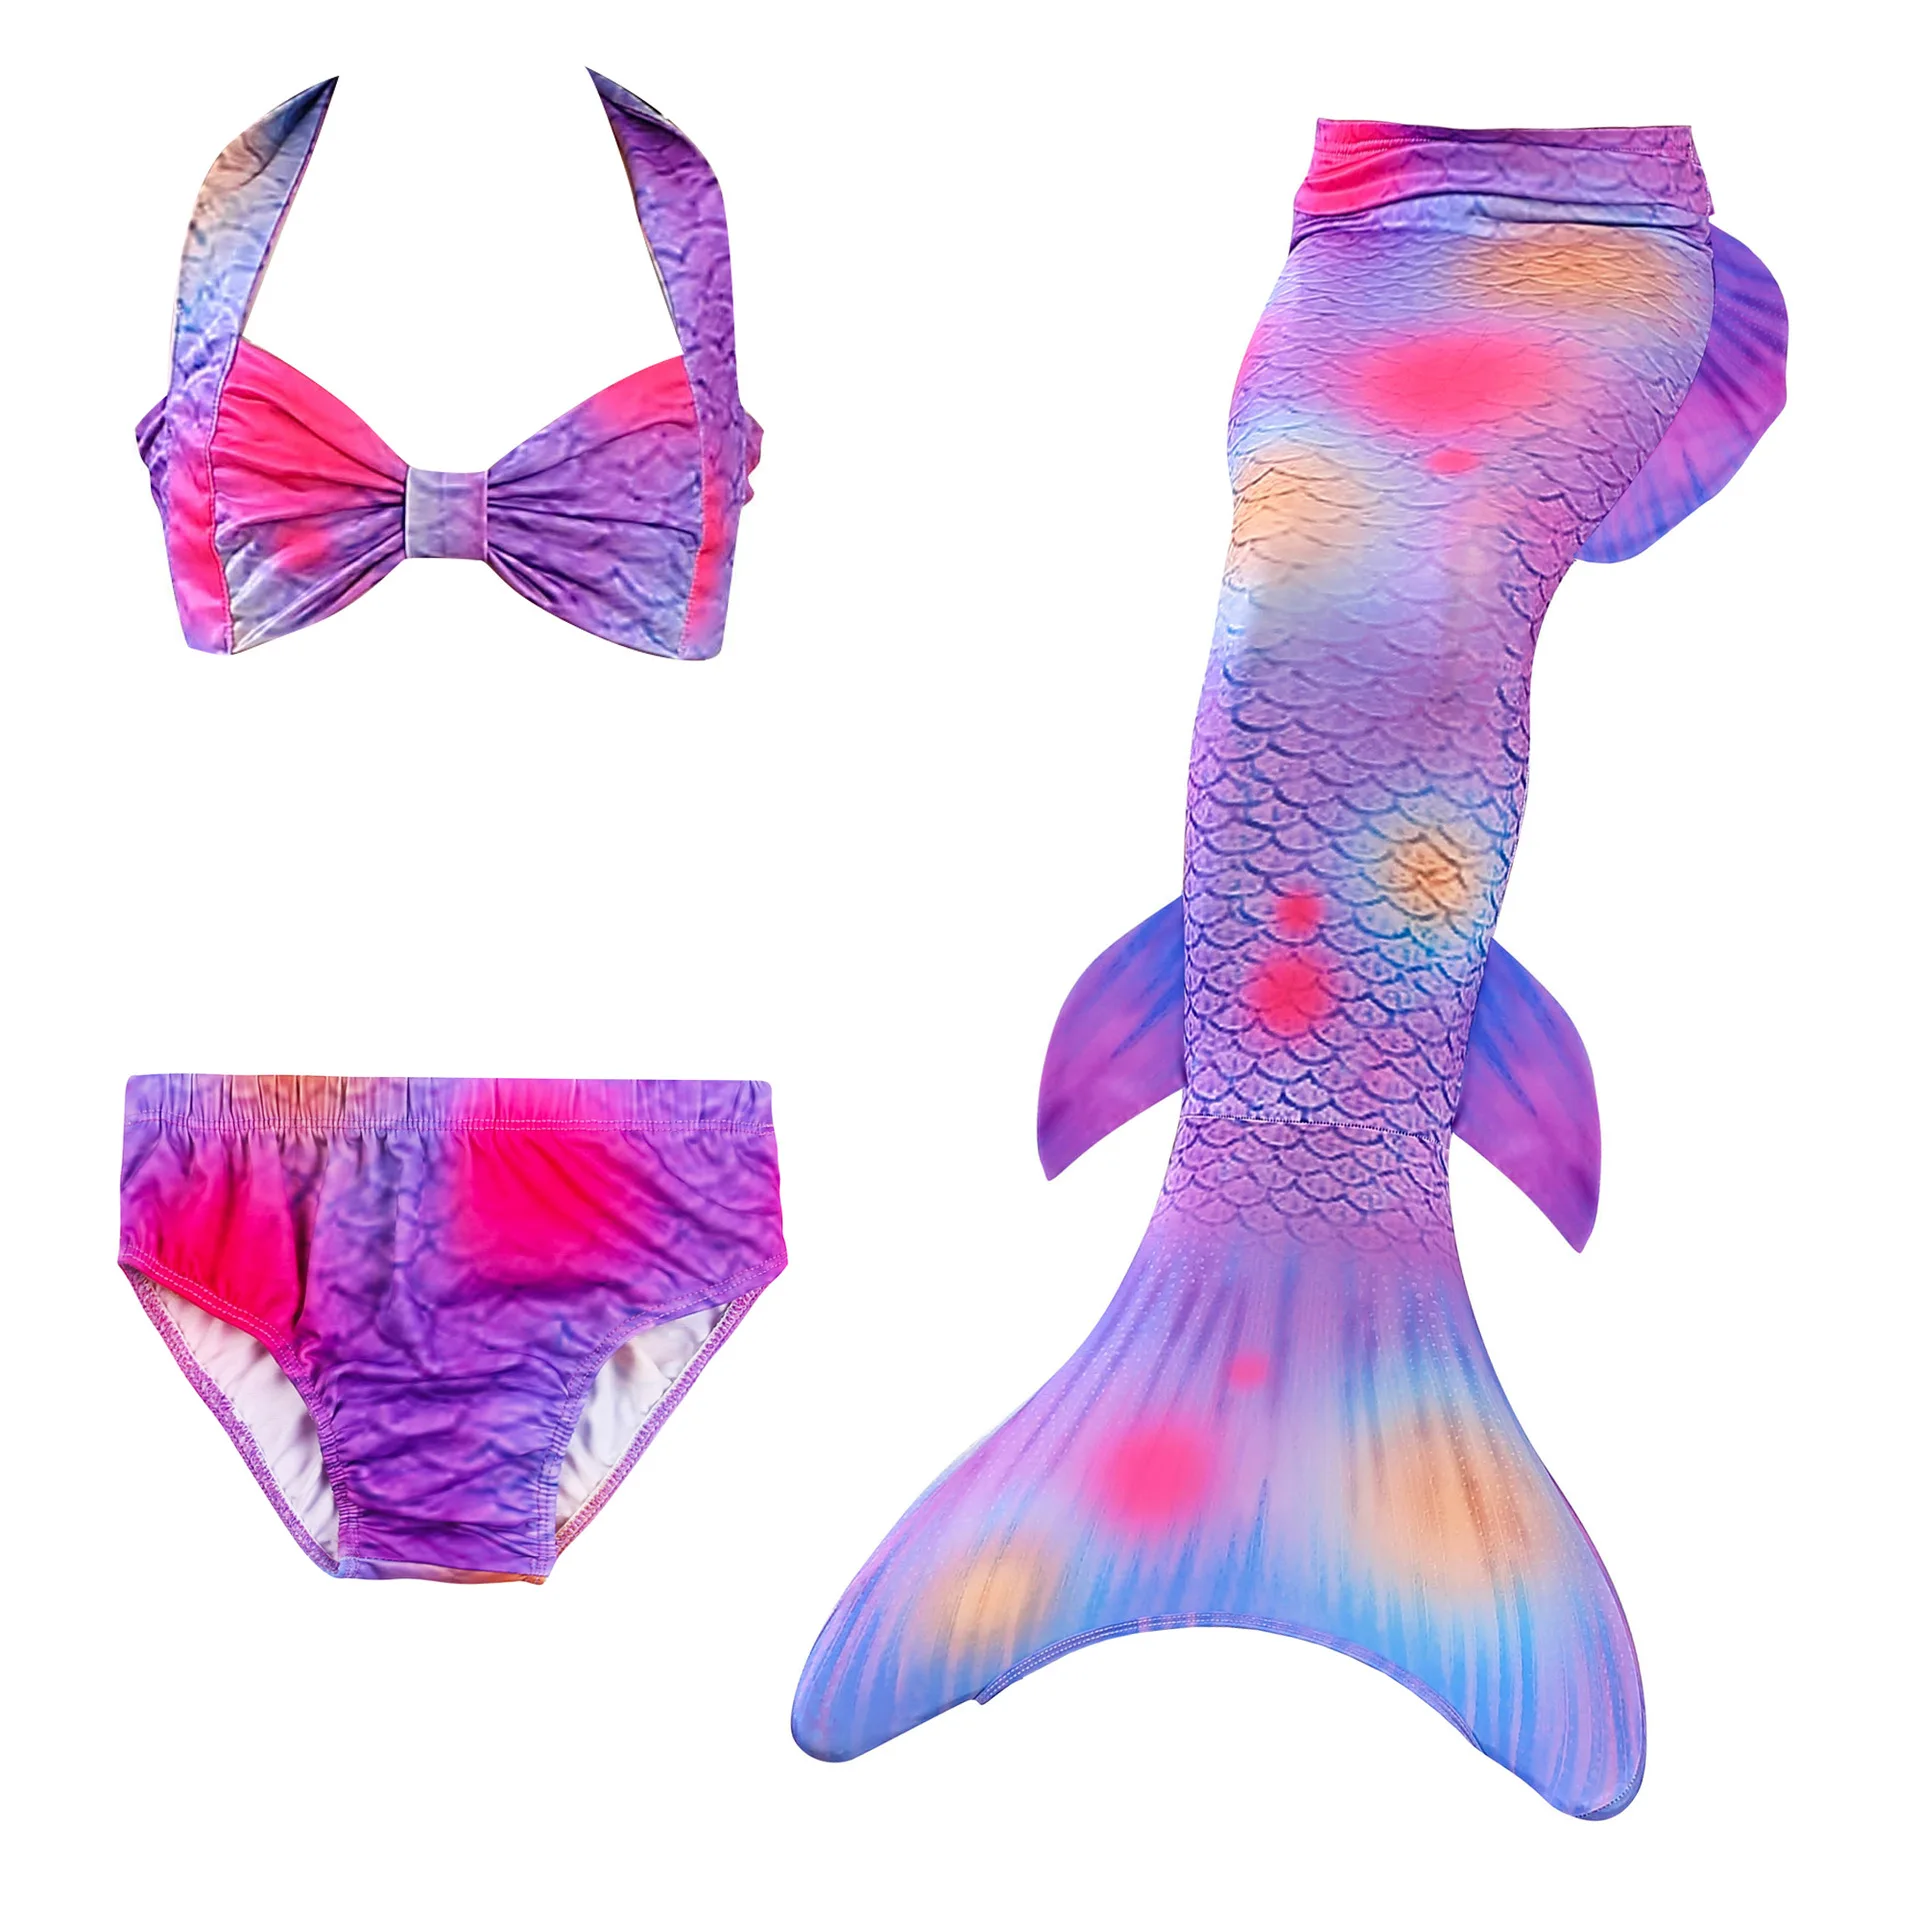 

Trending wholesale vendors mermaid party clothing for young girls beauty Swimsuit mermaid costume tail, Pink,purple,red,sky blue